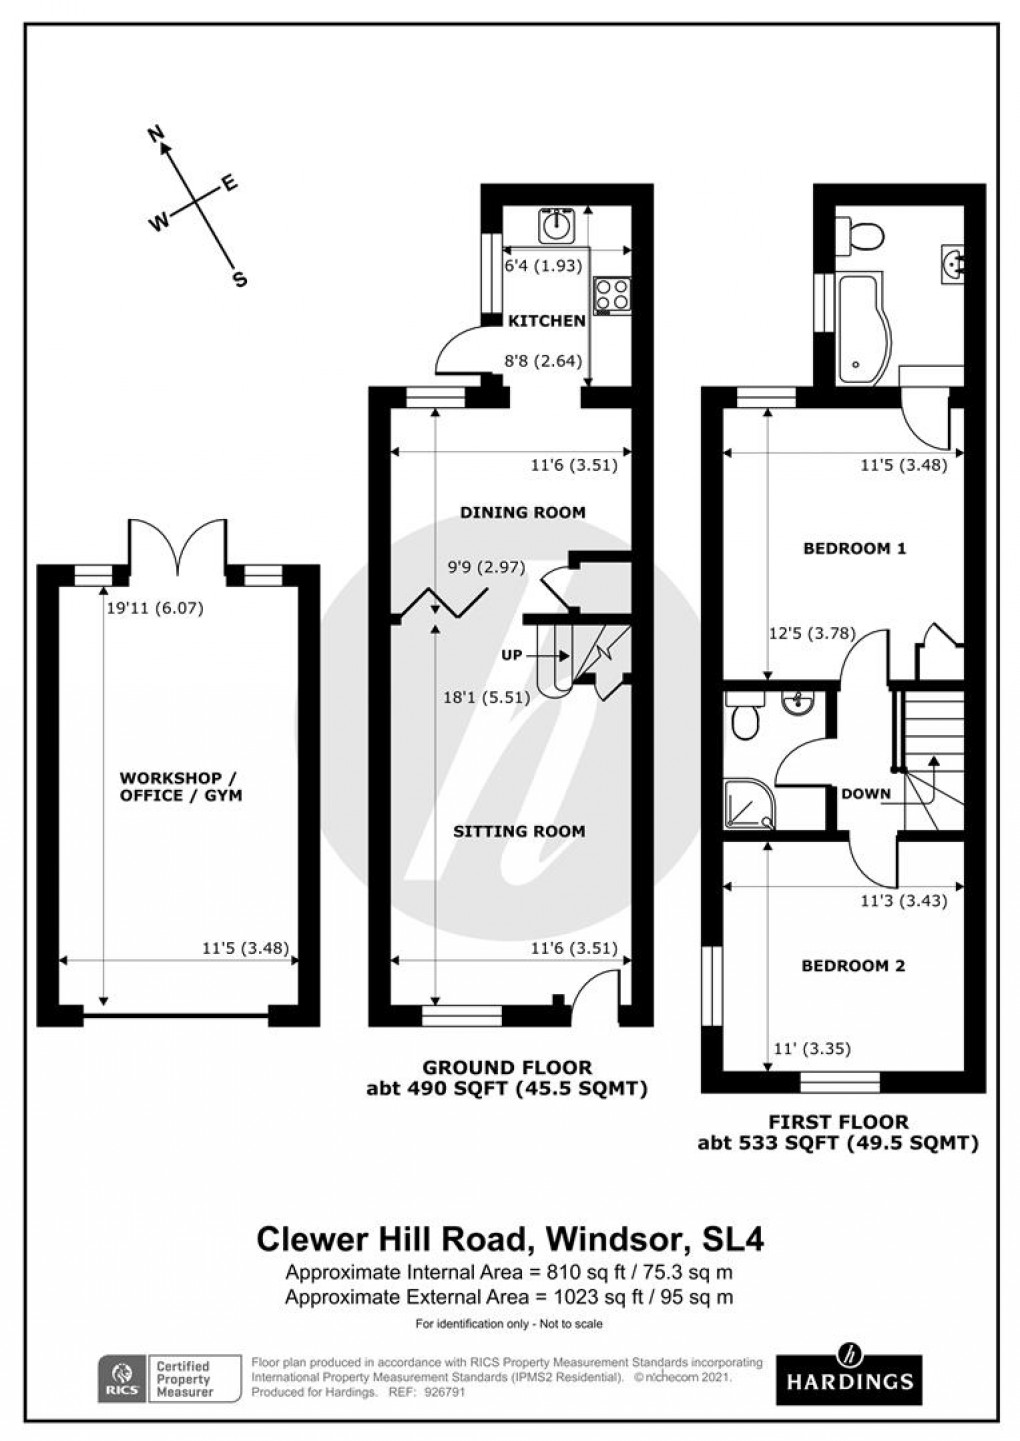 Floorplan for Clewer Hill Road, Windsor